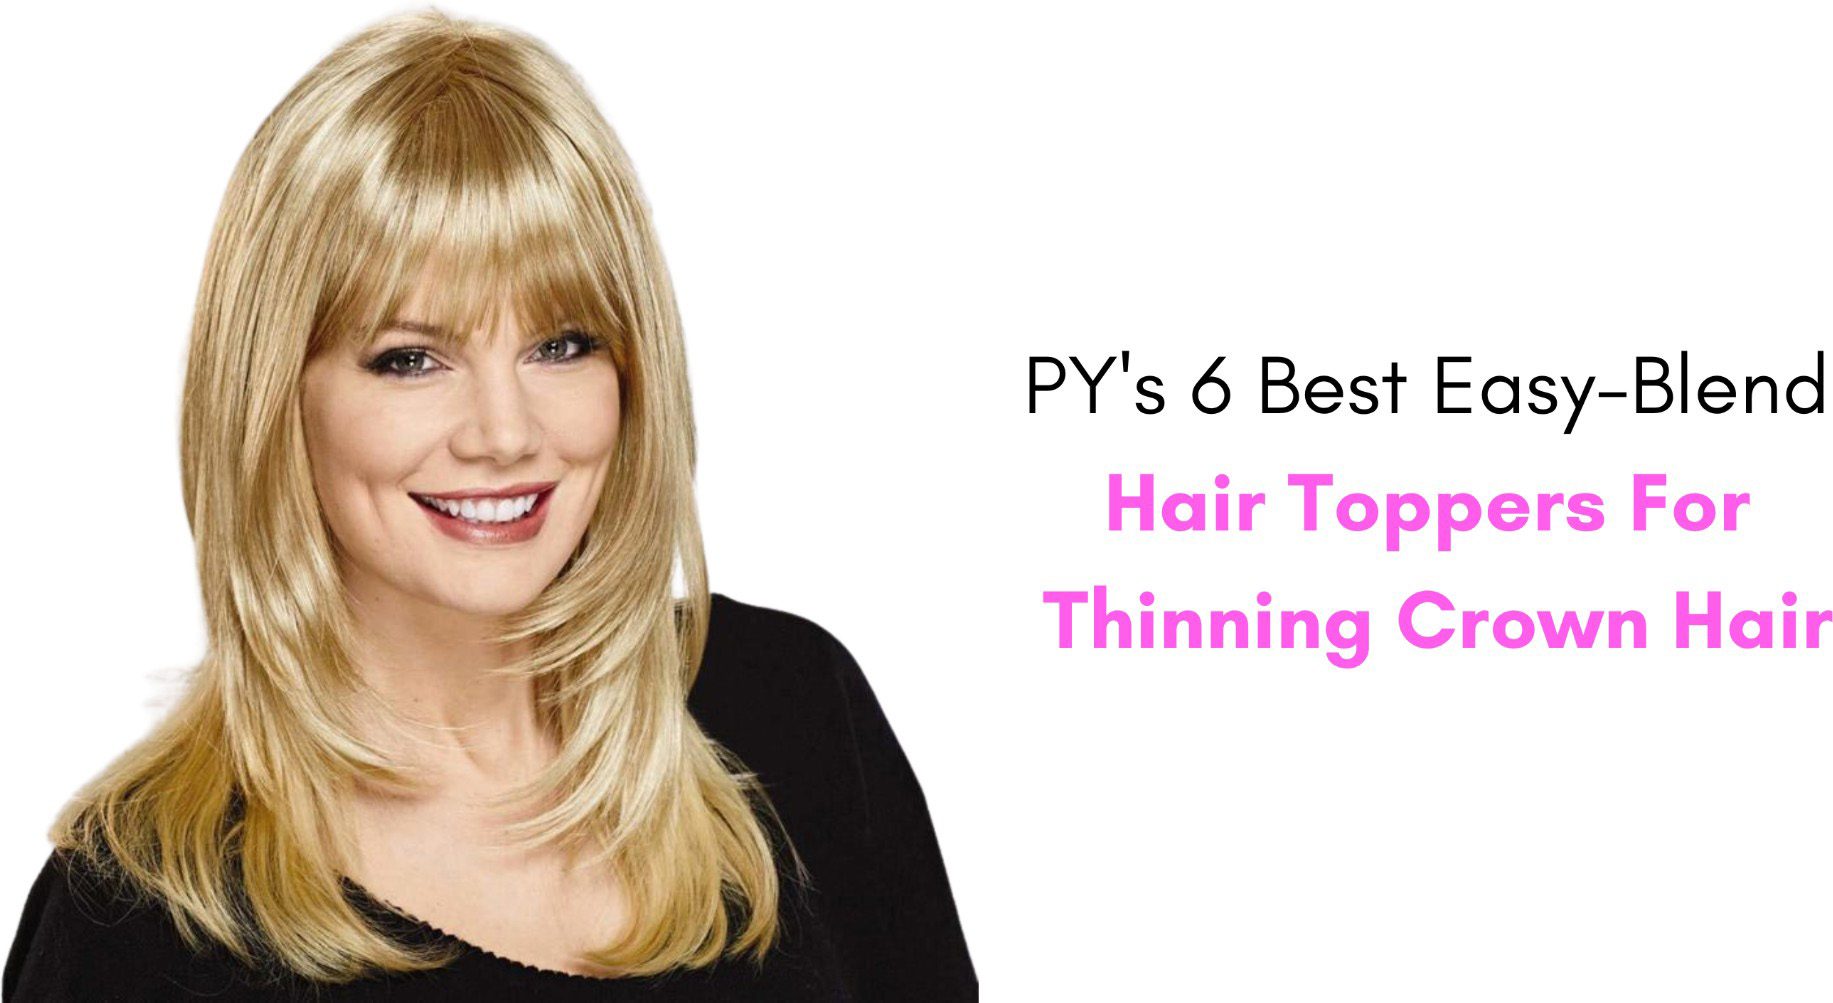 PY's 6 Best Easy-Blend Hair Toppers For Thinning Crown Hair | Paula Young  Blog